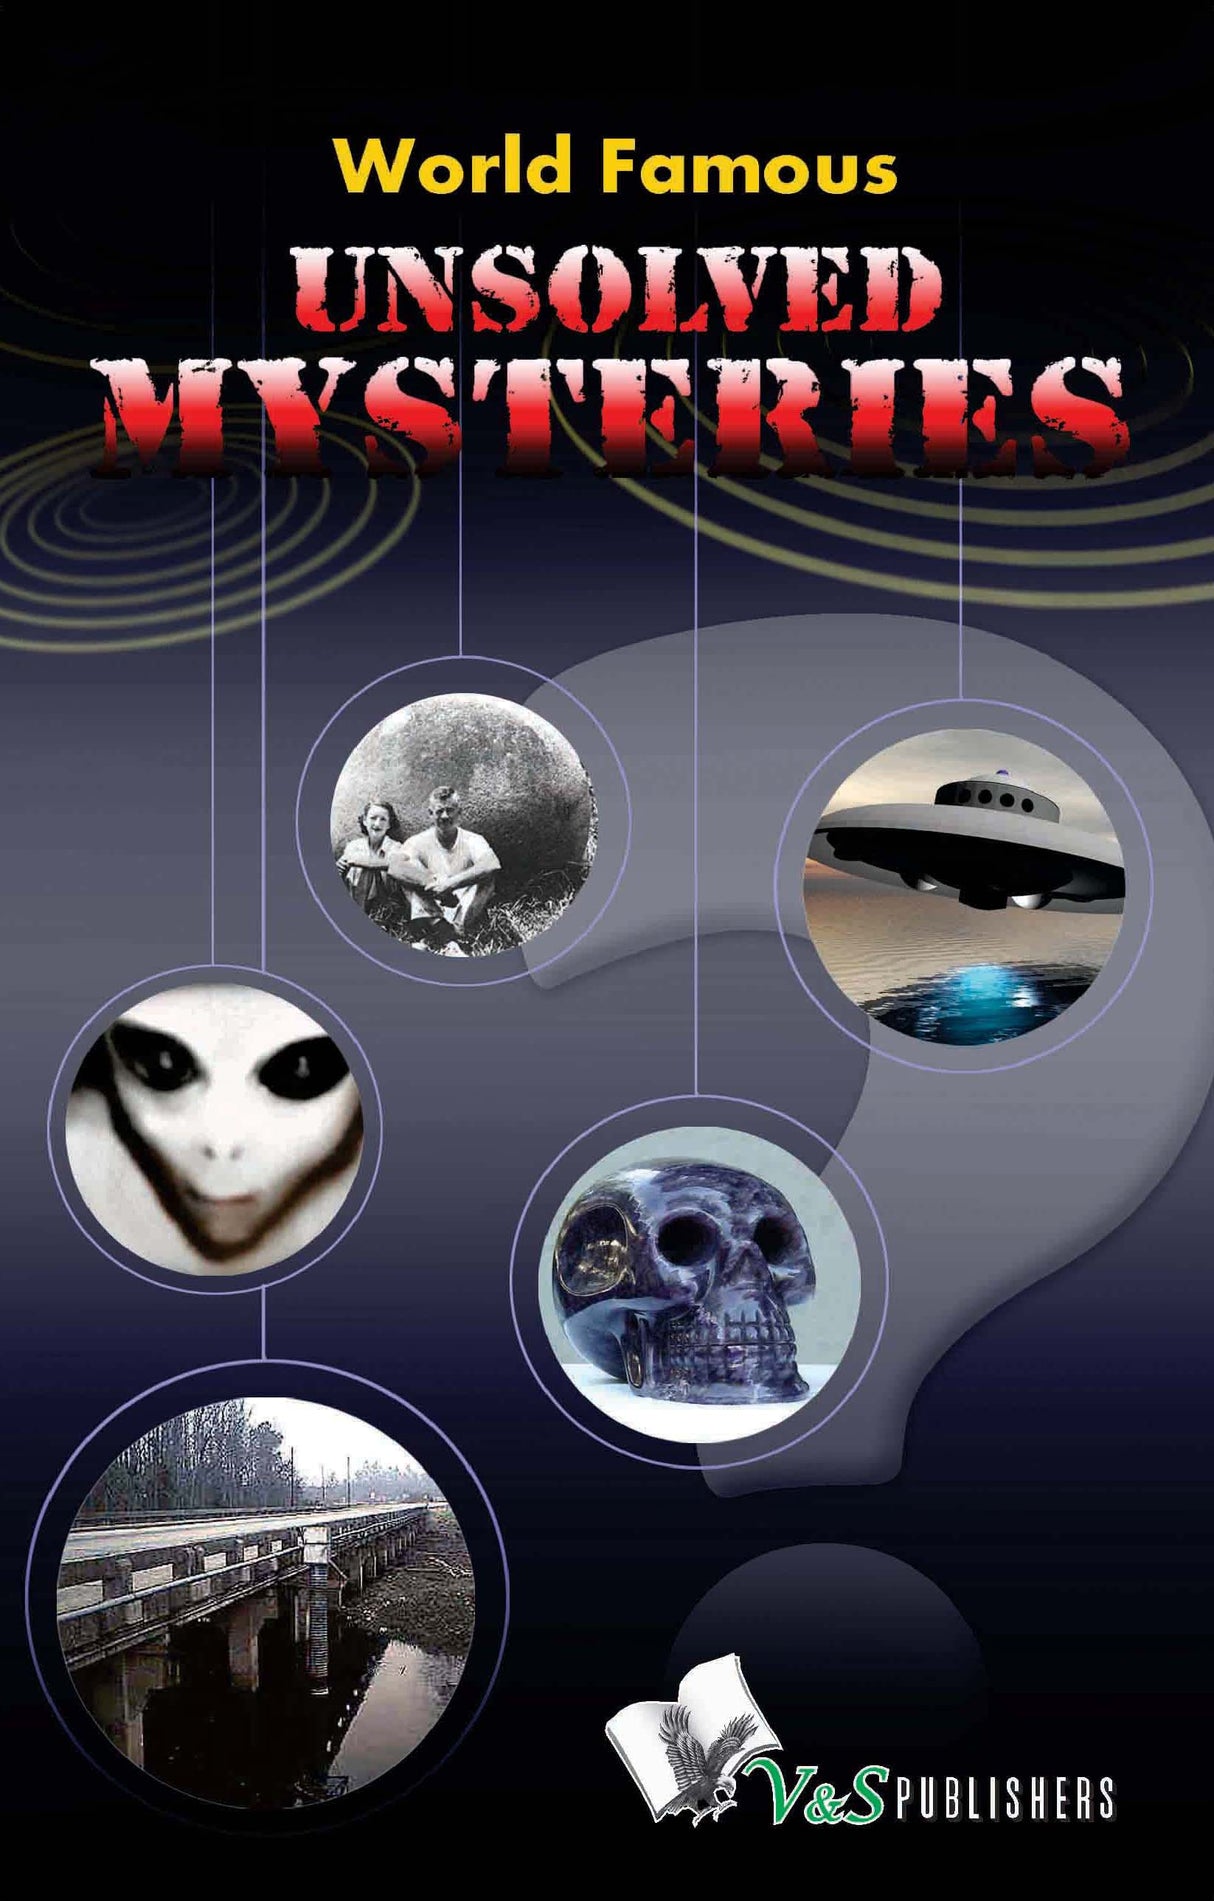 World Famous Unsolved Mysteries: World famous mysteries that defy logic & science